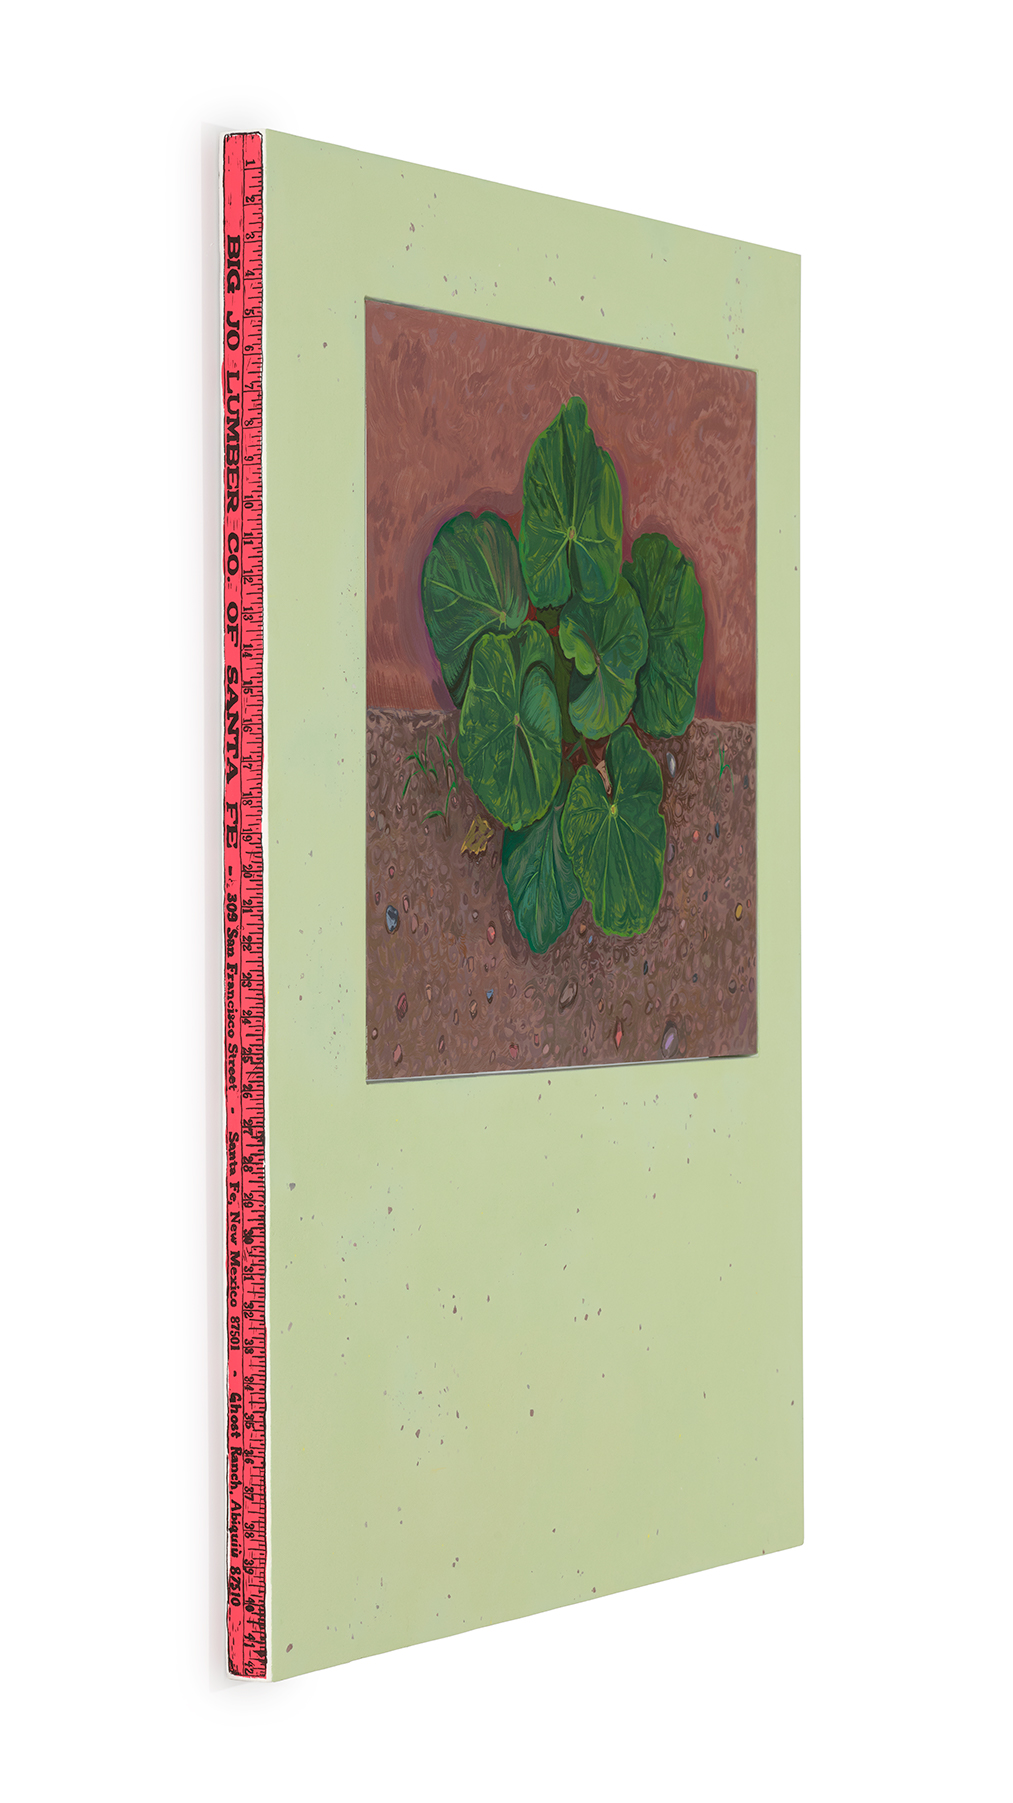 This is an image that shows the side view of O'Keeffe's Hollyhock showing a screen printed ruler painted along the edge of the painting with a pink background and black numbers.